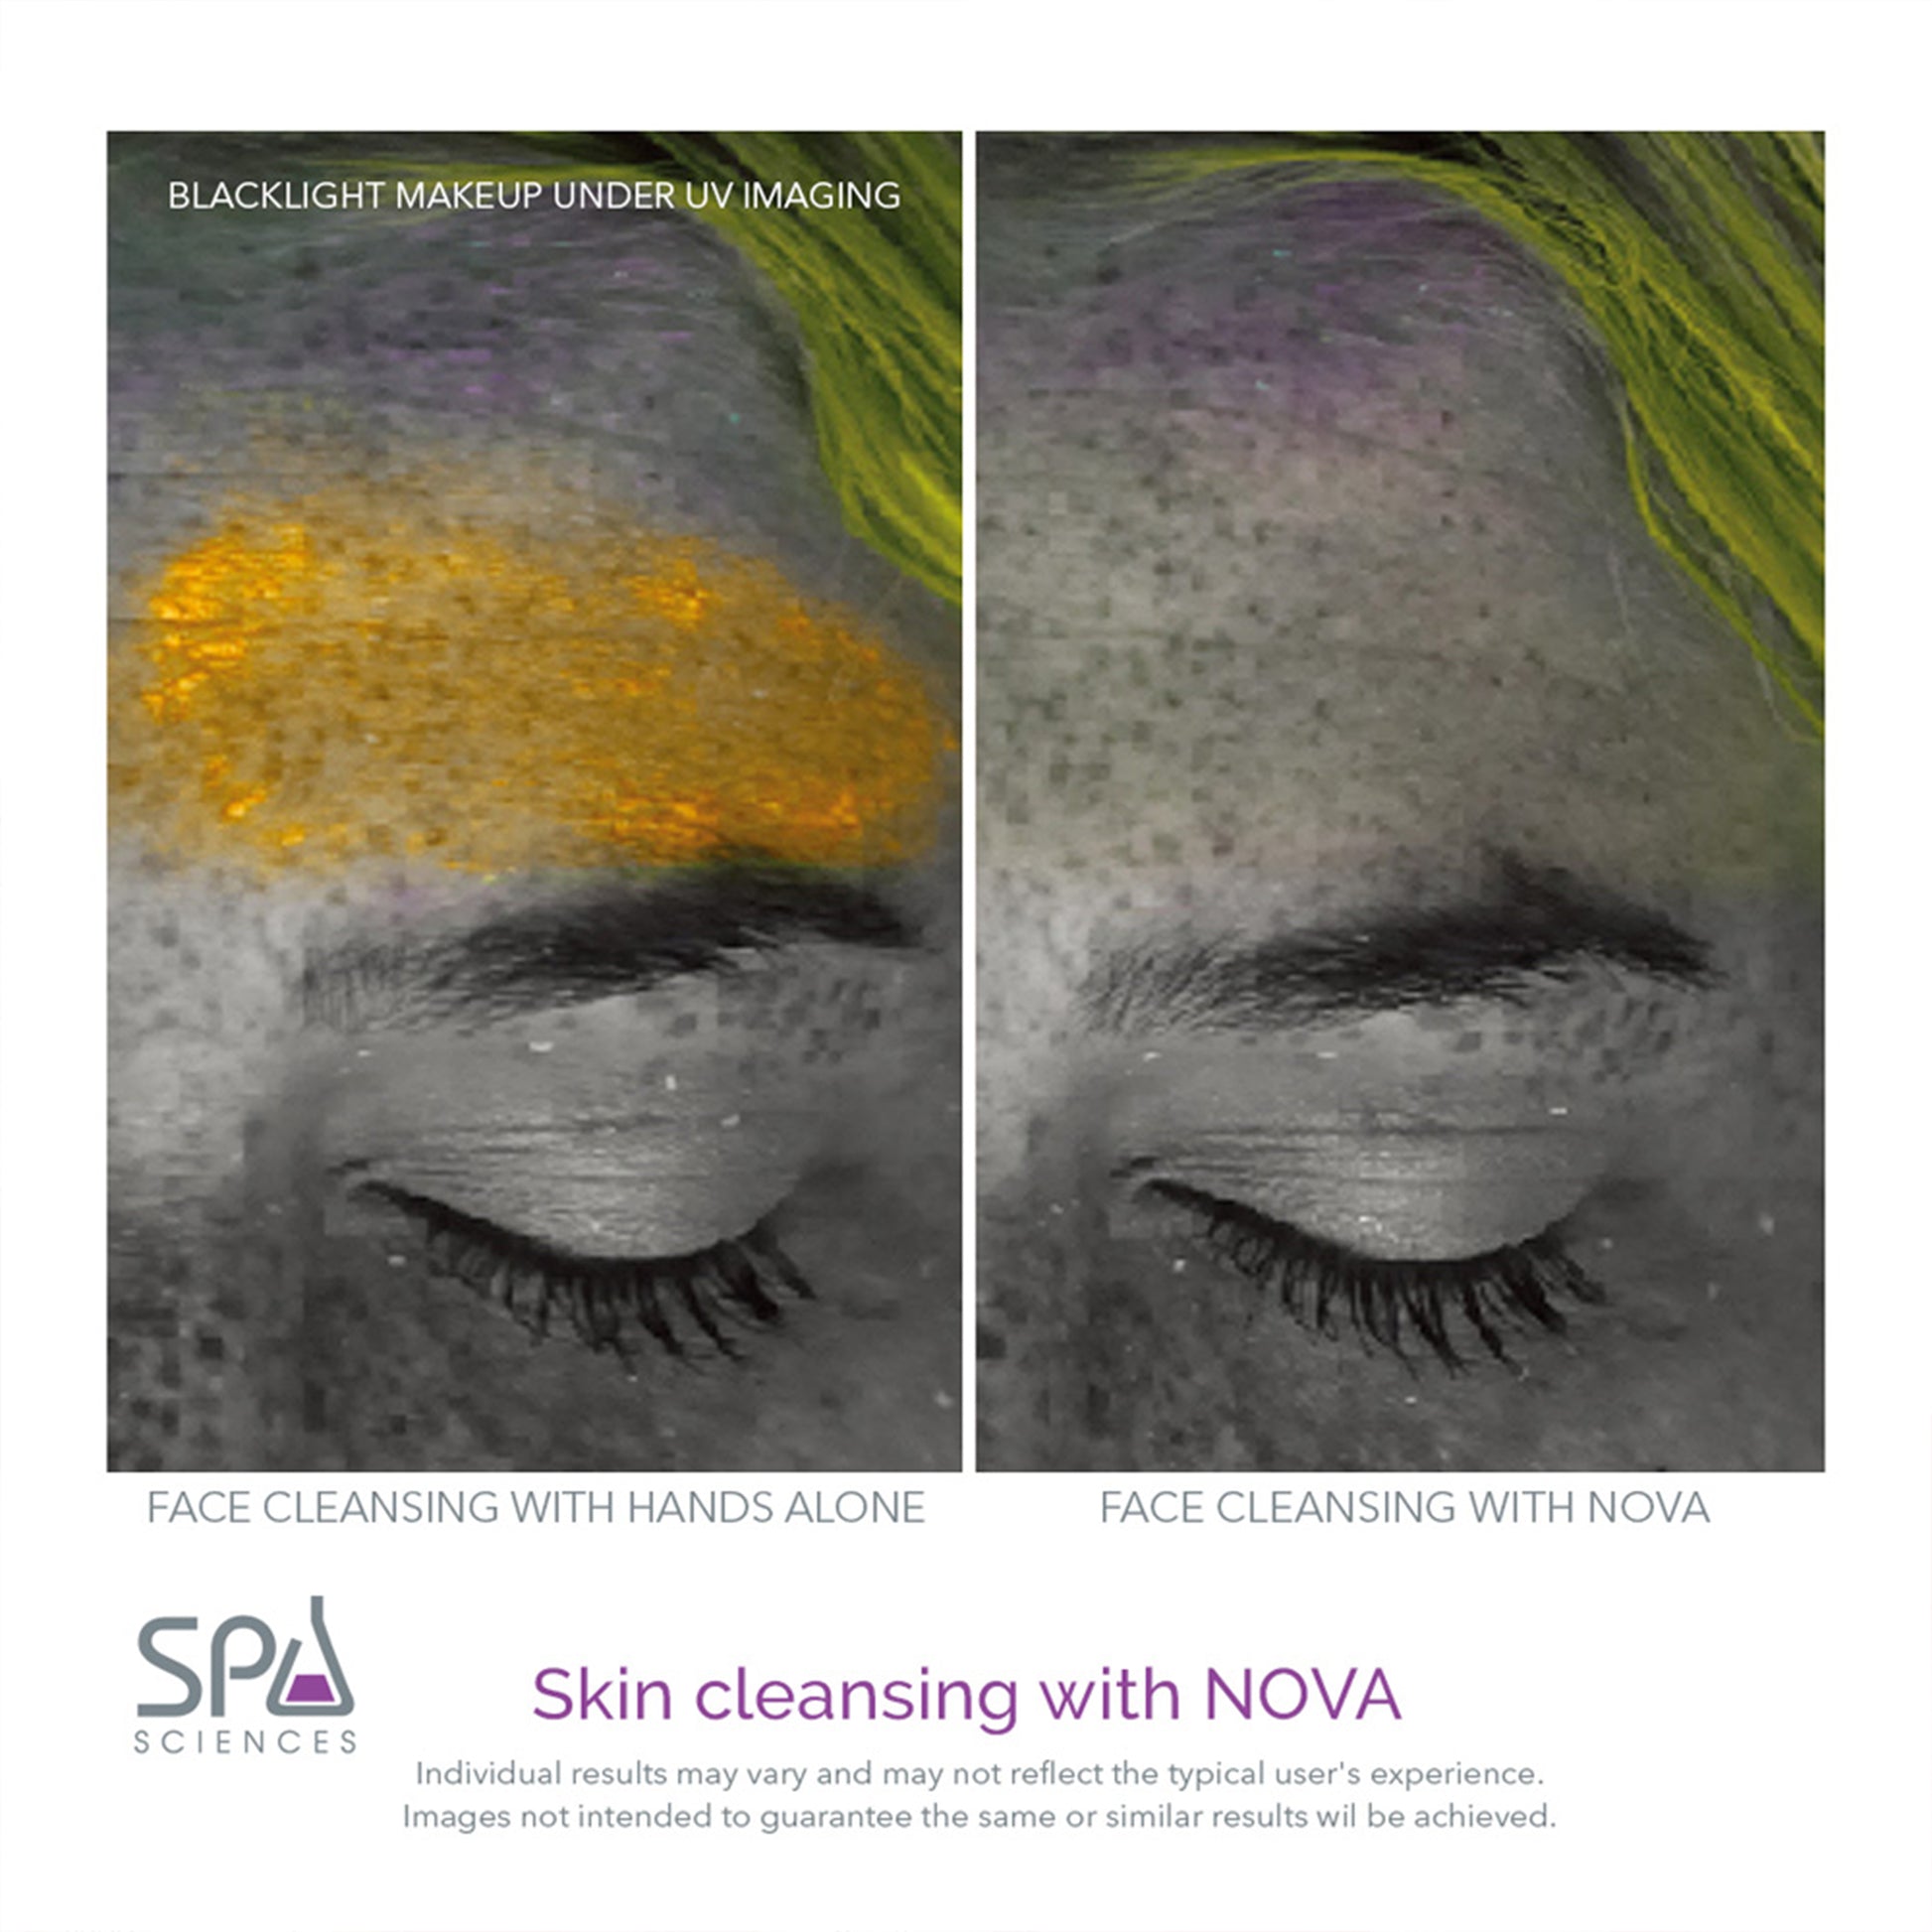 Cleanse your skin with the powerful Spa Sciences NOVA sonic cleansing brush for an effective and safe cleansing experience, thanks to its antimicrobial protection.